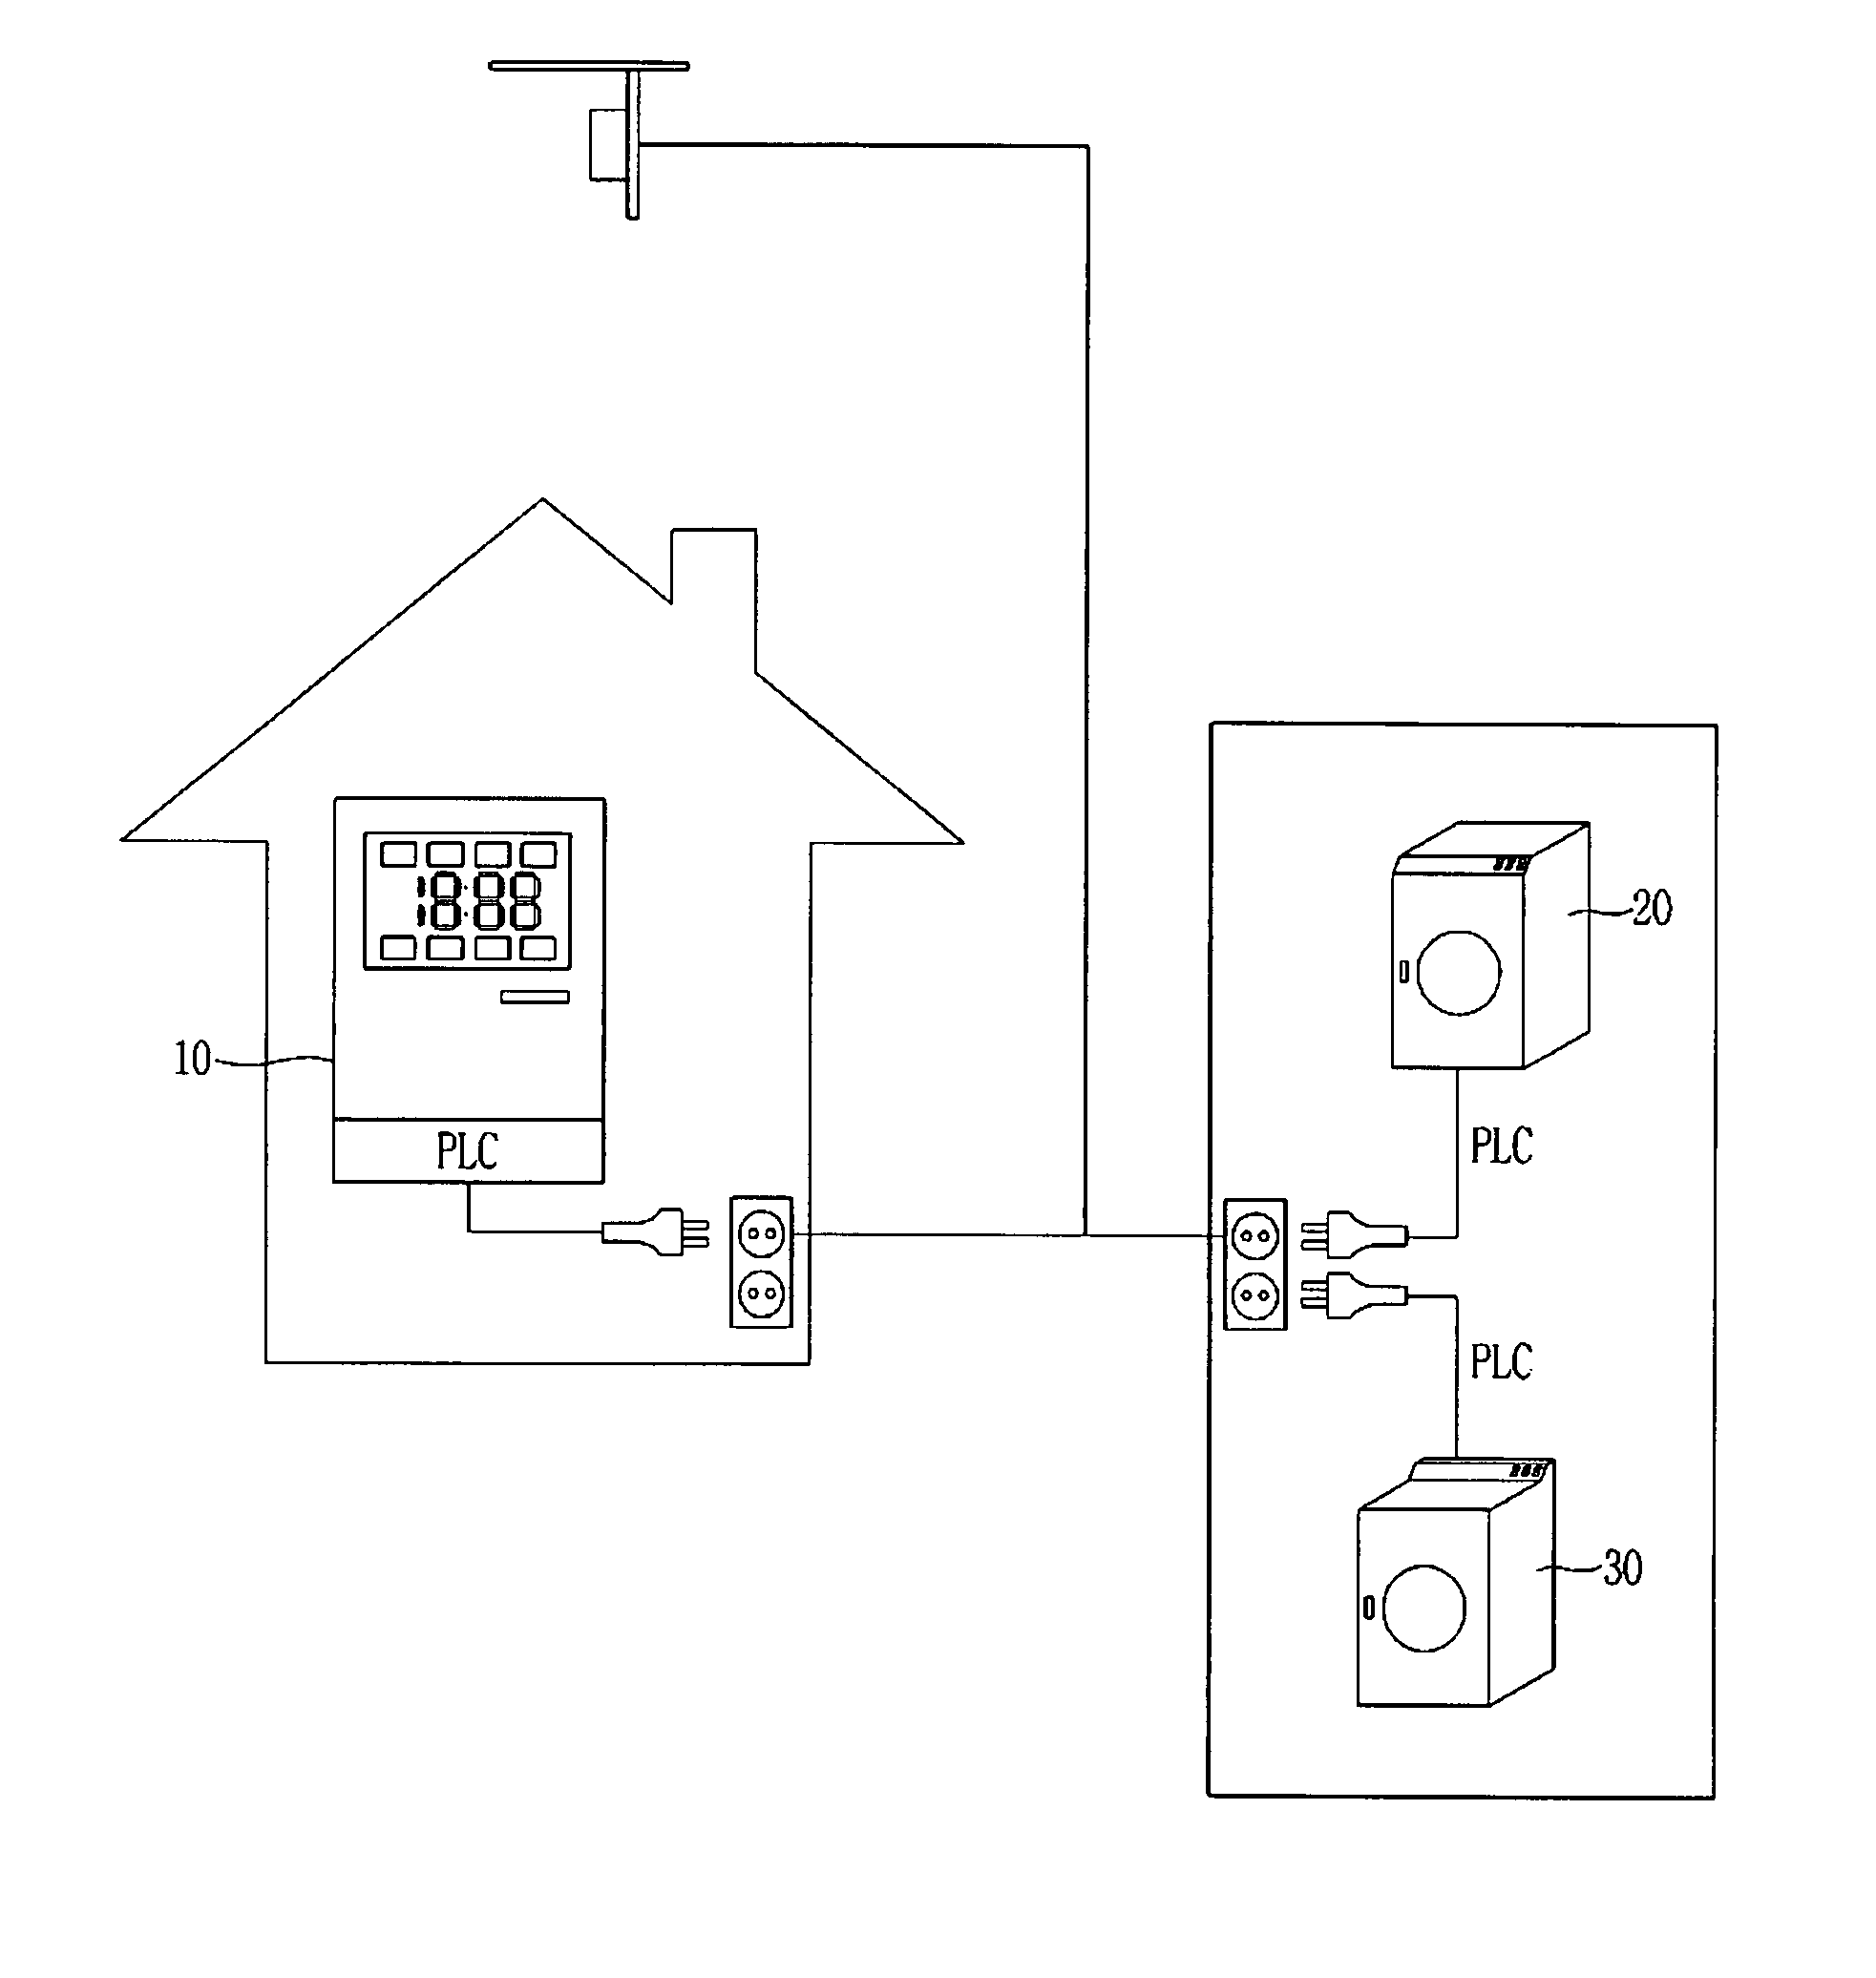 Remote controlling system for electric device